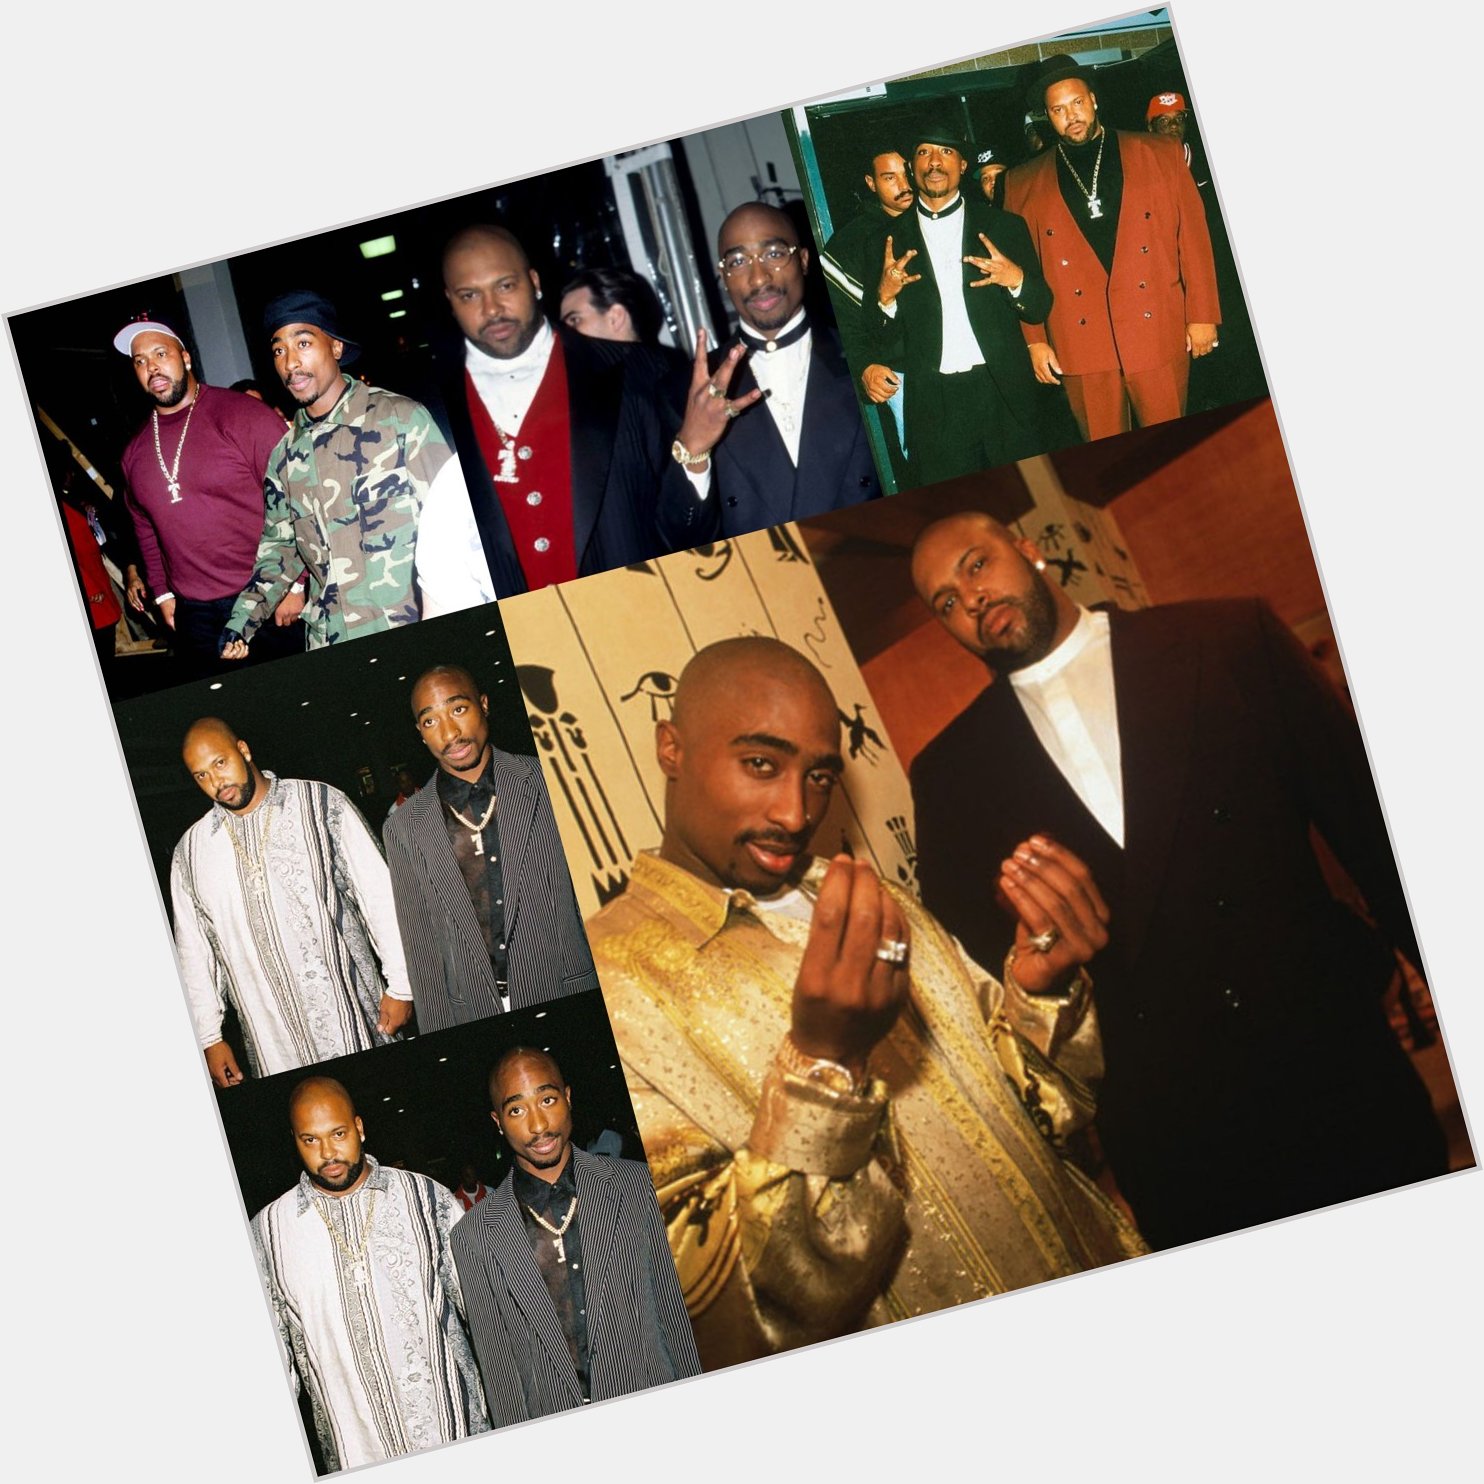 HAPPY 58TH BIRTHDAY MARION \"SUGE\" KNIGHT. FREE SUGE KNIGHT & REST IN HEAVEN 2PAC. 